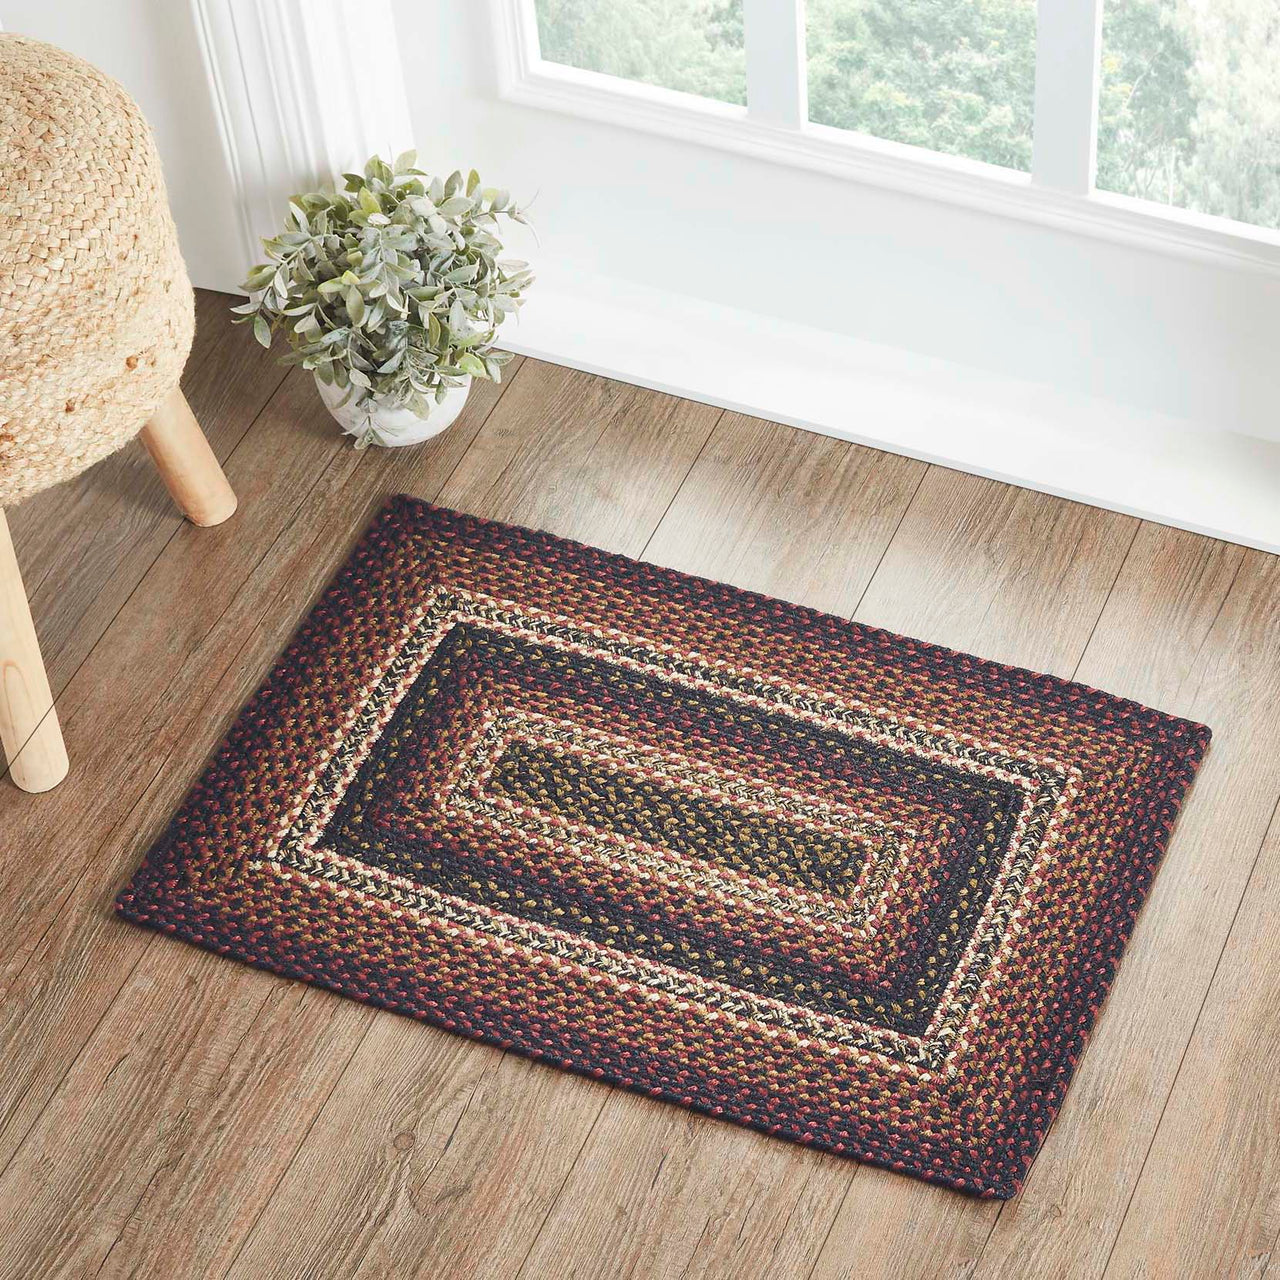 Beckham Jute Braided Rug Rect with Rug Pad 20"x30" VHC Brands